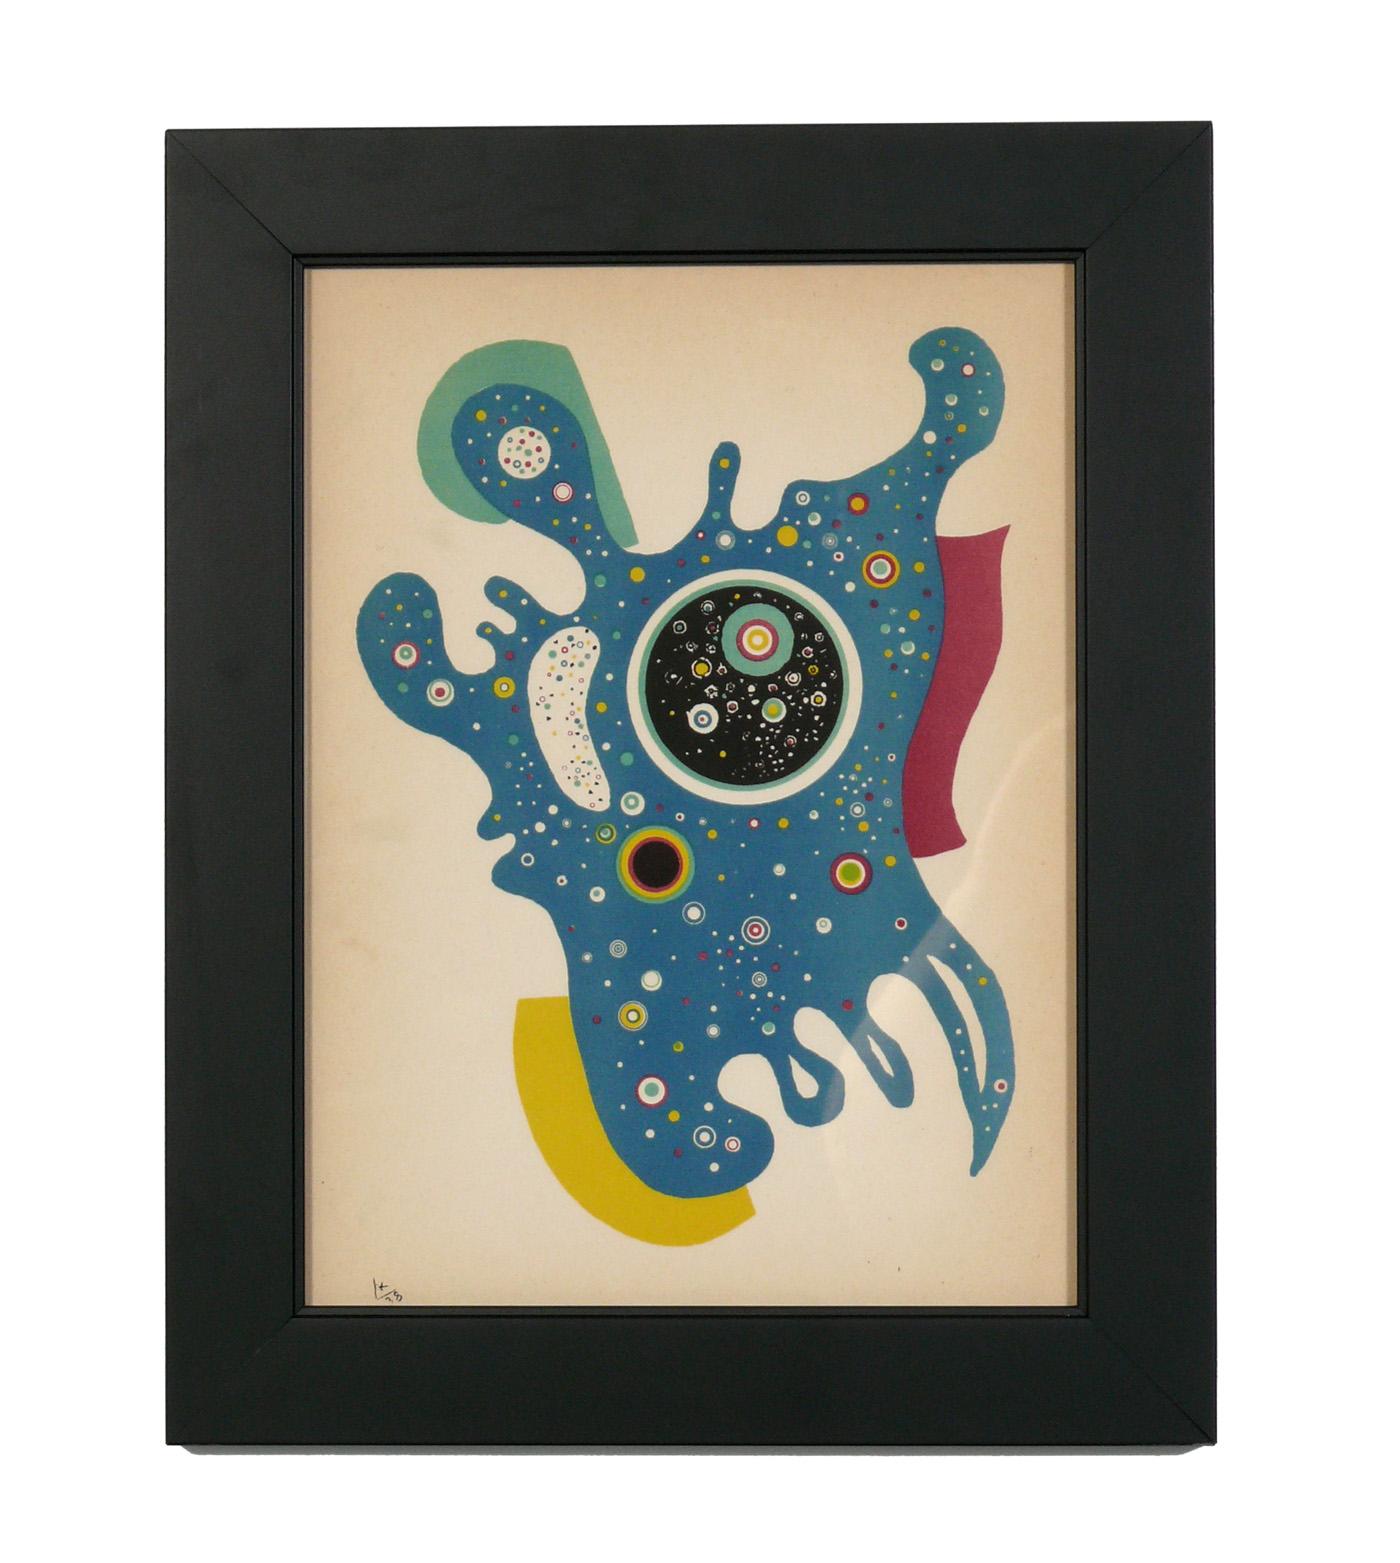 Selection of Surrealist Lithographs, by Wassily Kandinsky and Andre Masson for the limited edition 1938 portfolio Verve and printed by the famed French printer Mourlot. The one seen on the left in the first photo is entitled 